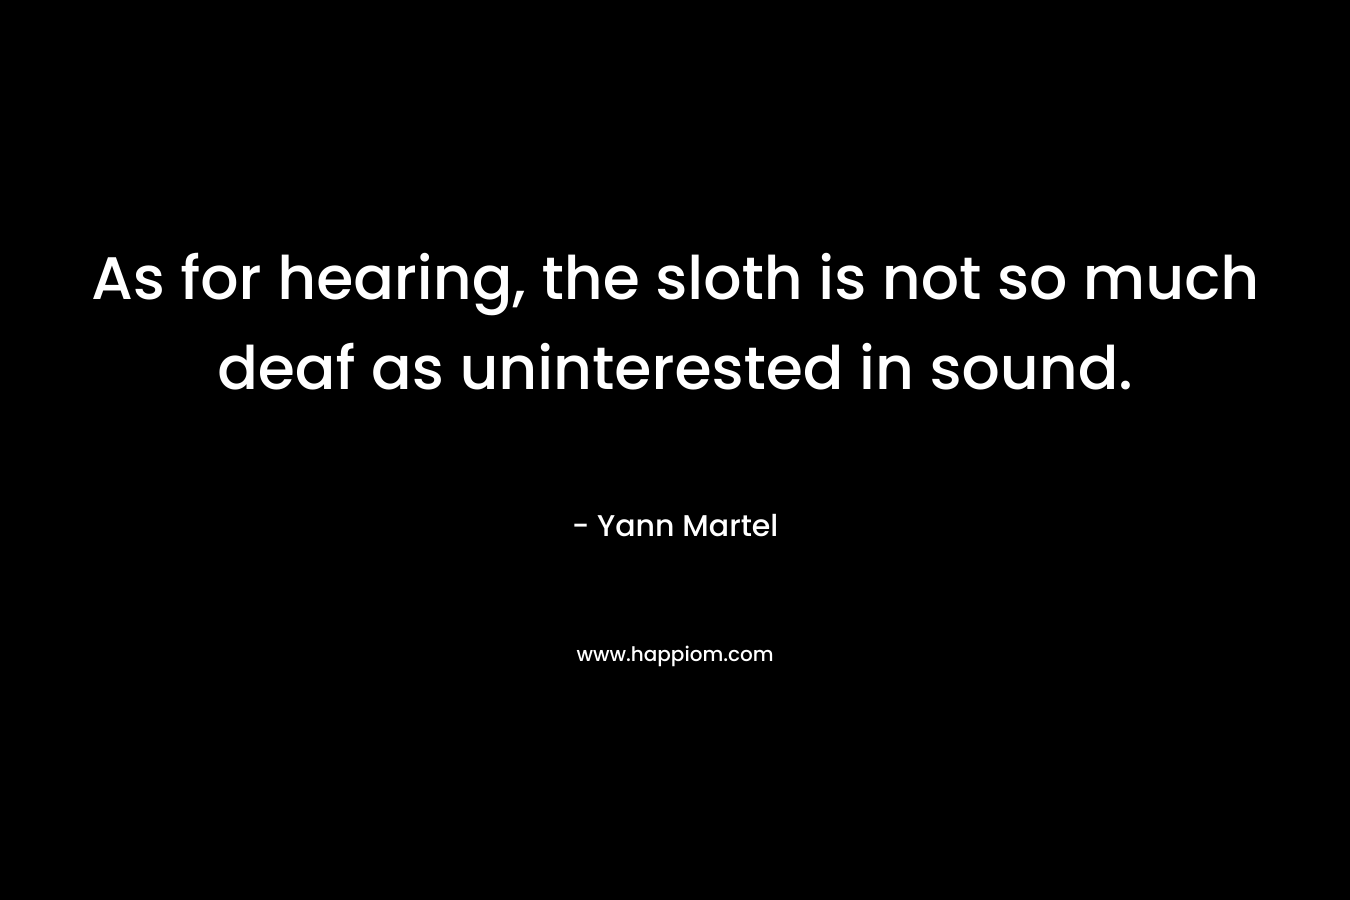 As for hearing, the sloth is not so much deaf as uninterested in sound. – Yann Martel